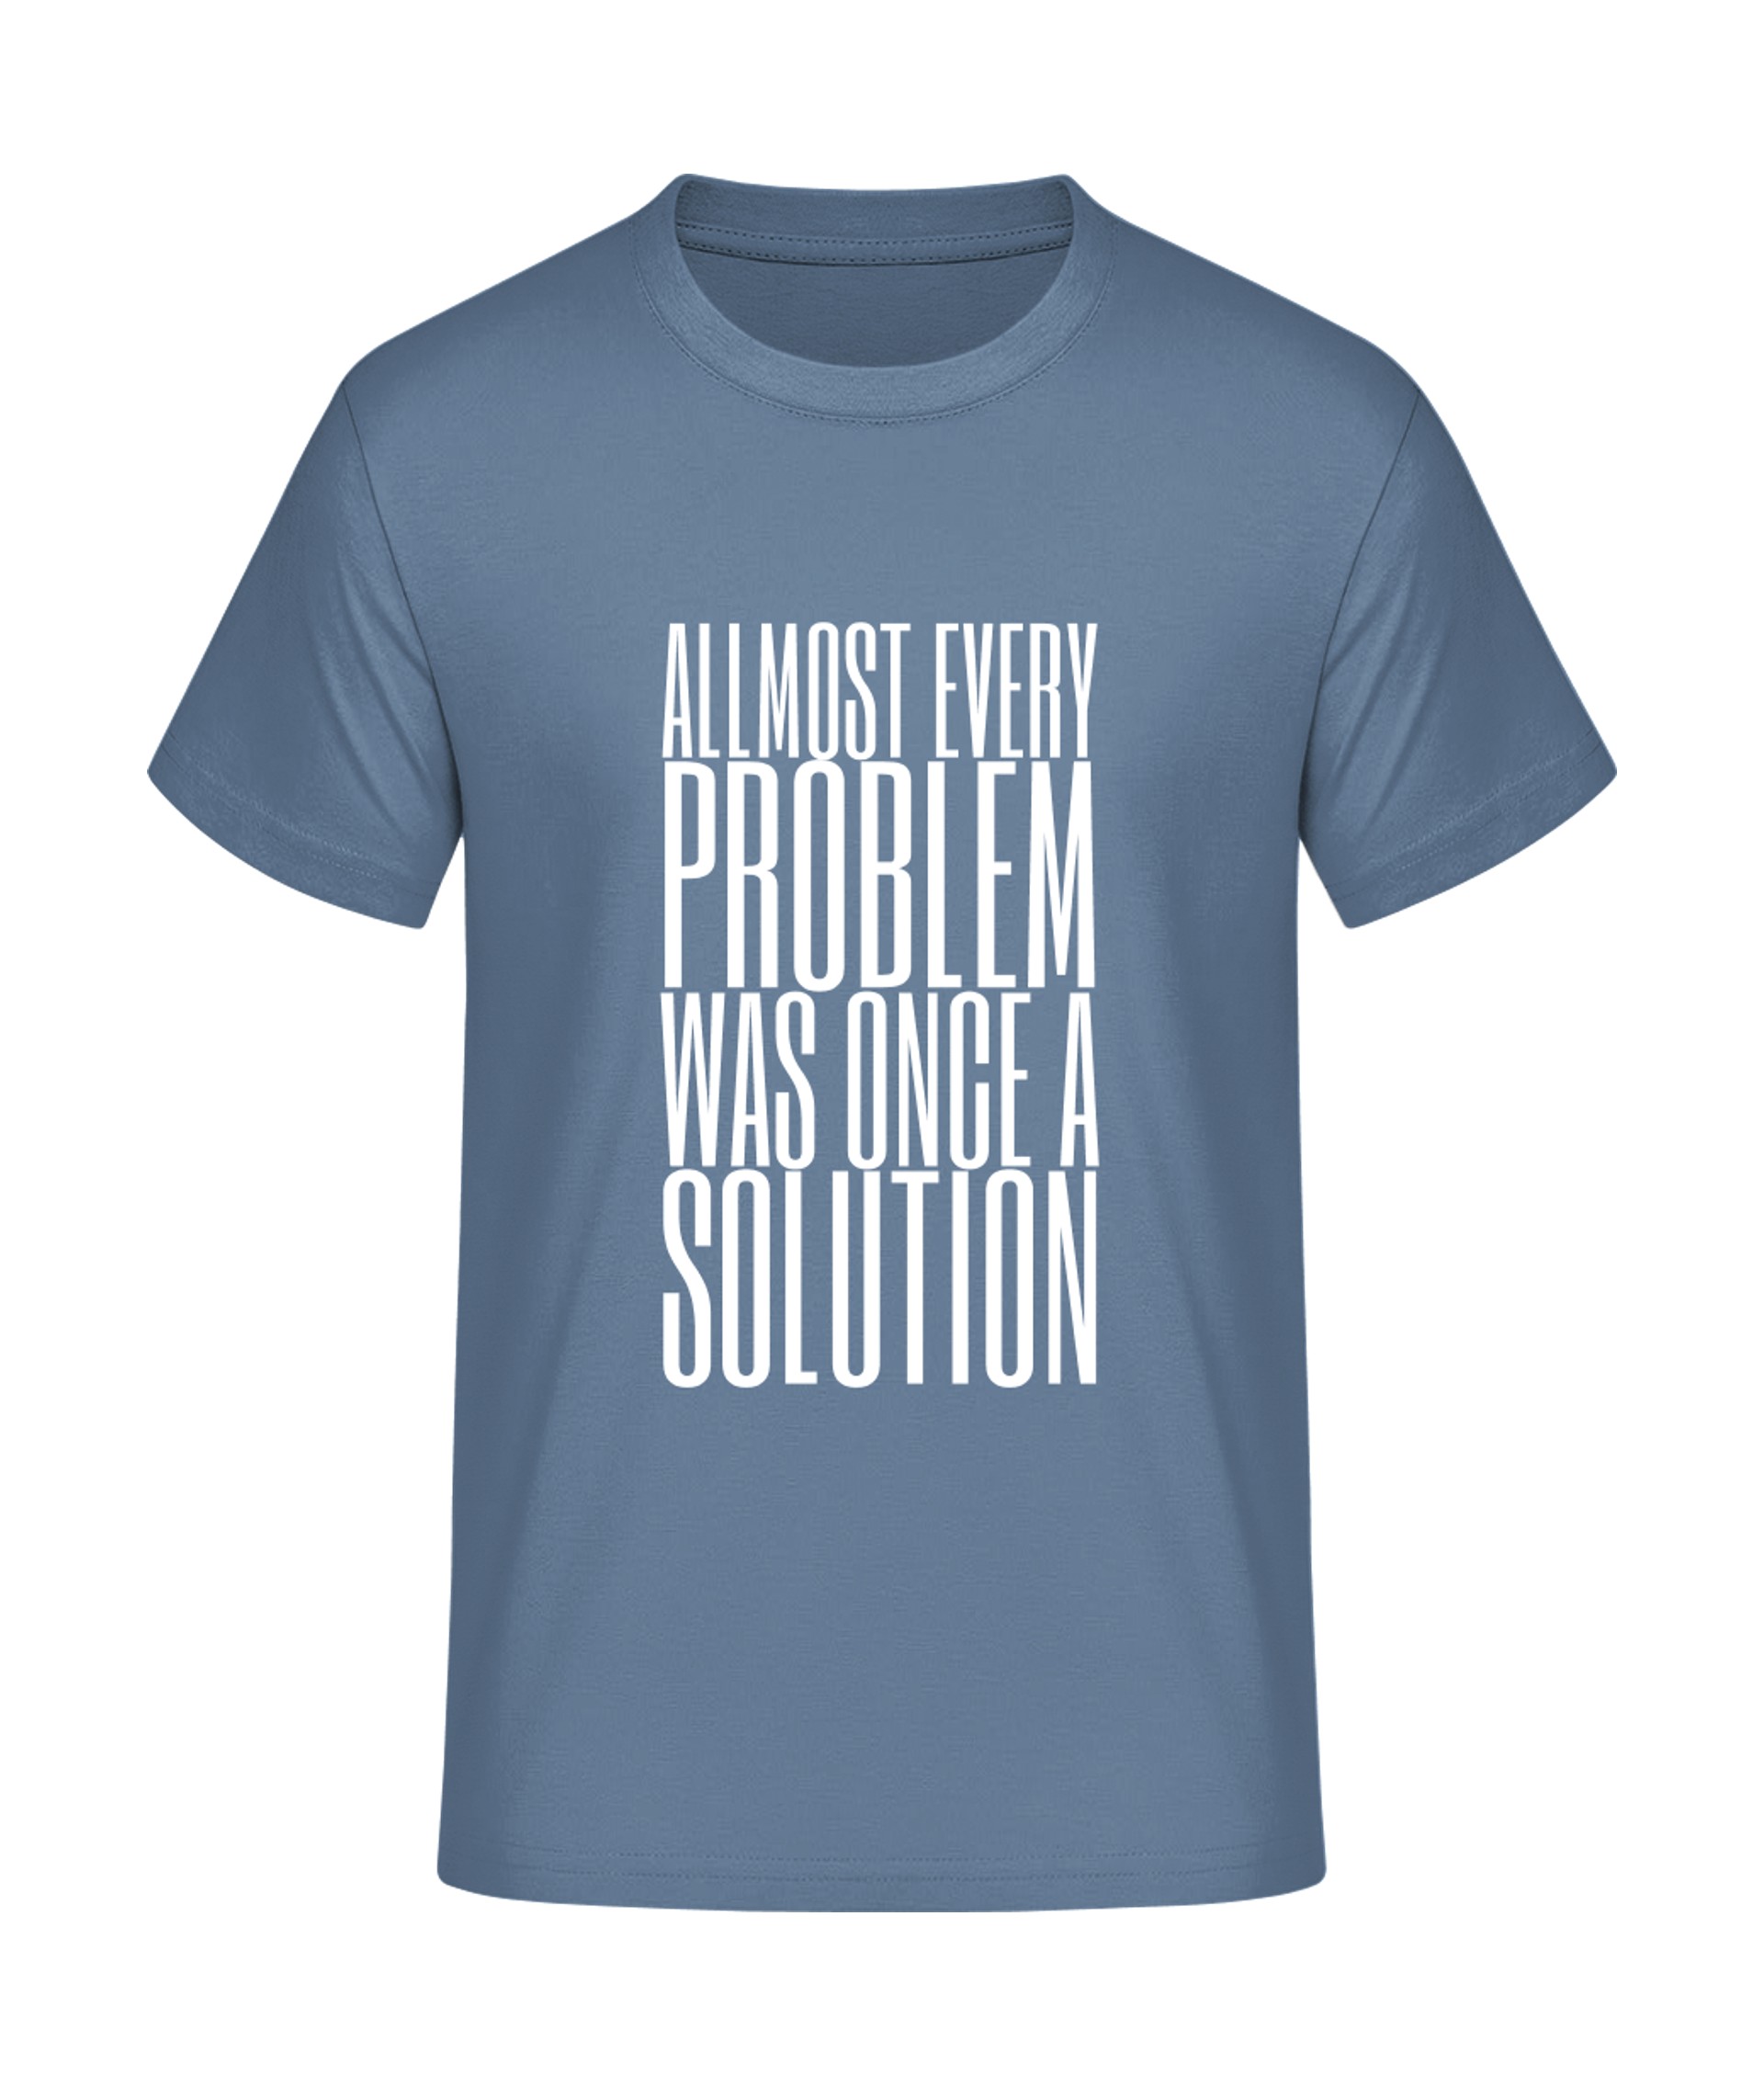 Almost every problem was once... T-Shirt bedrucken